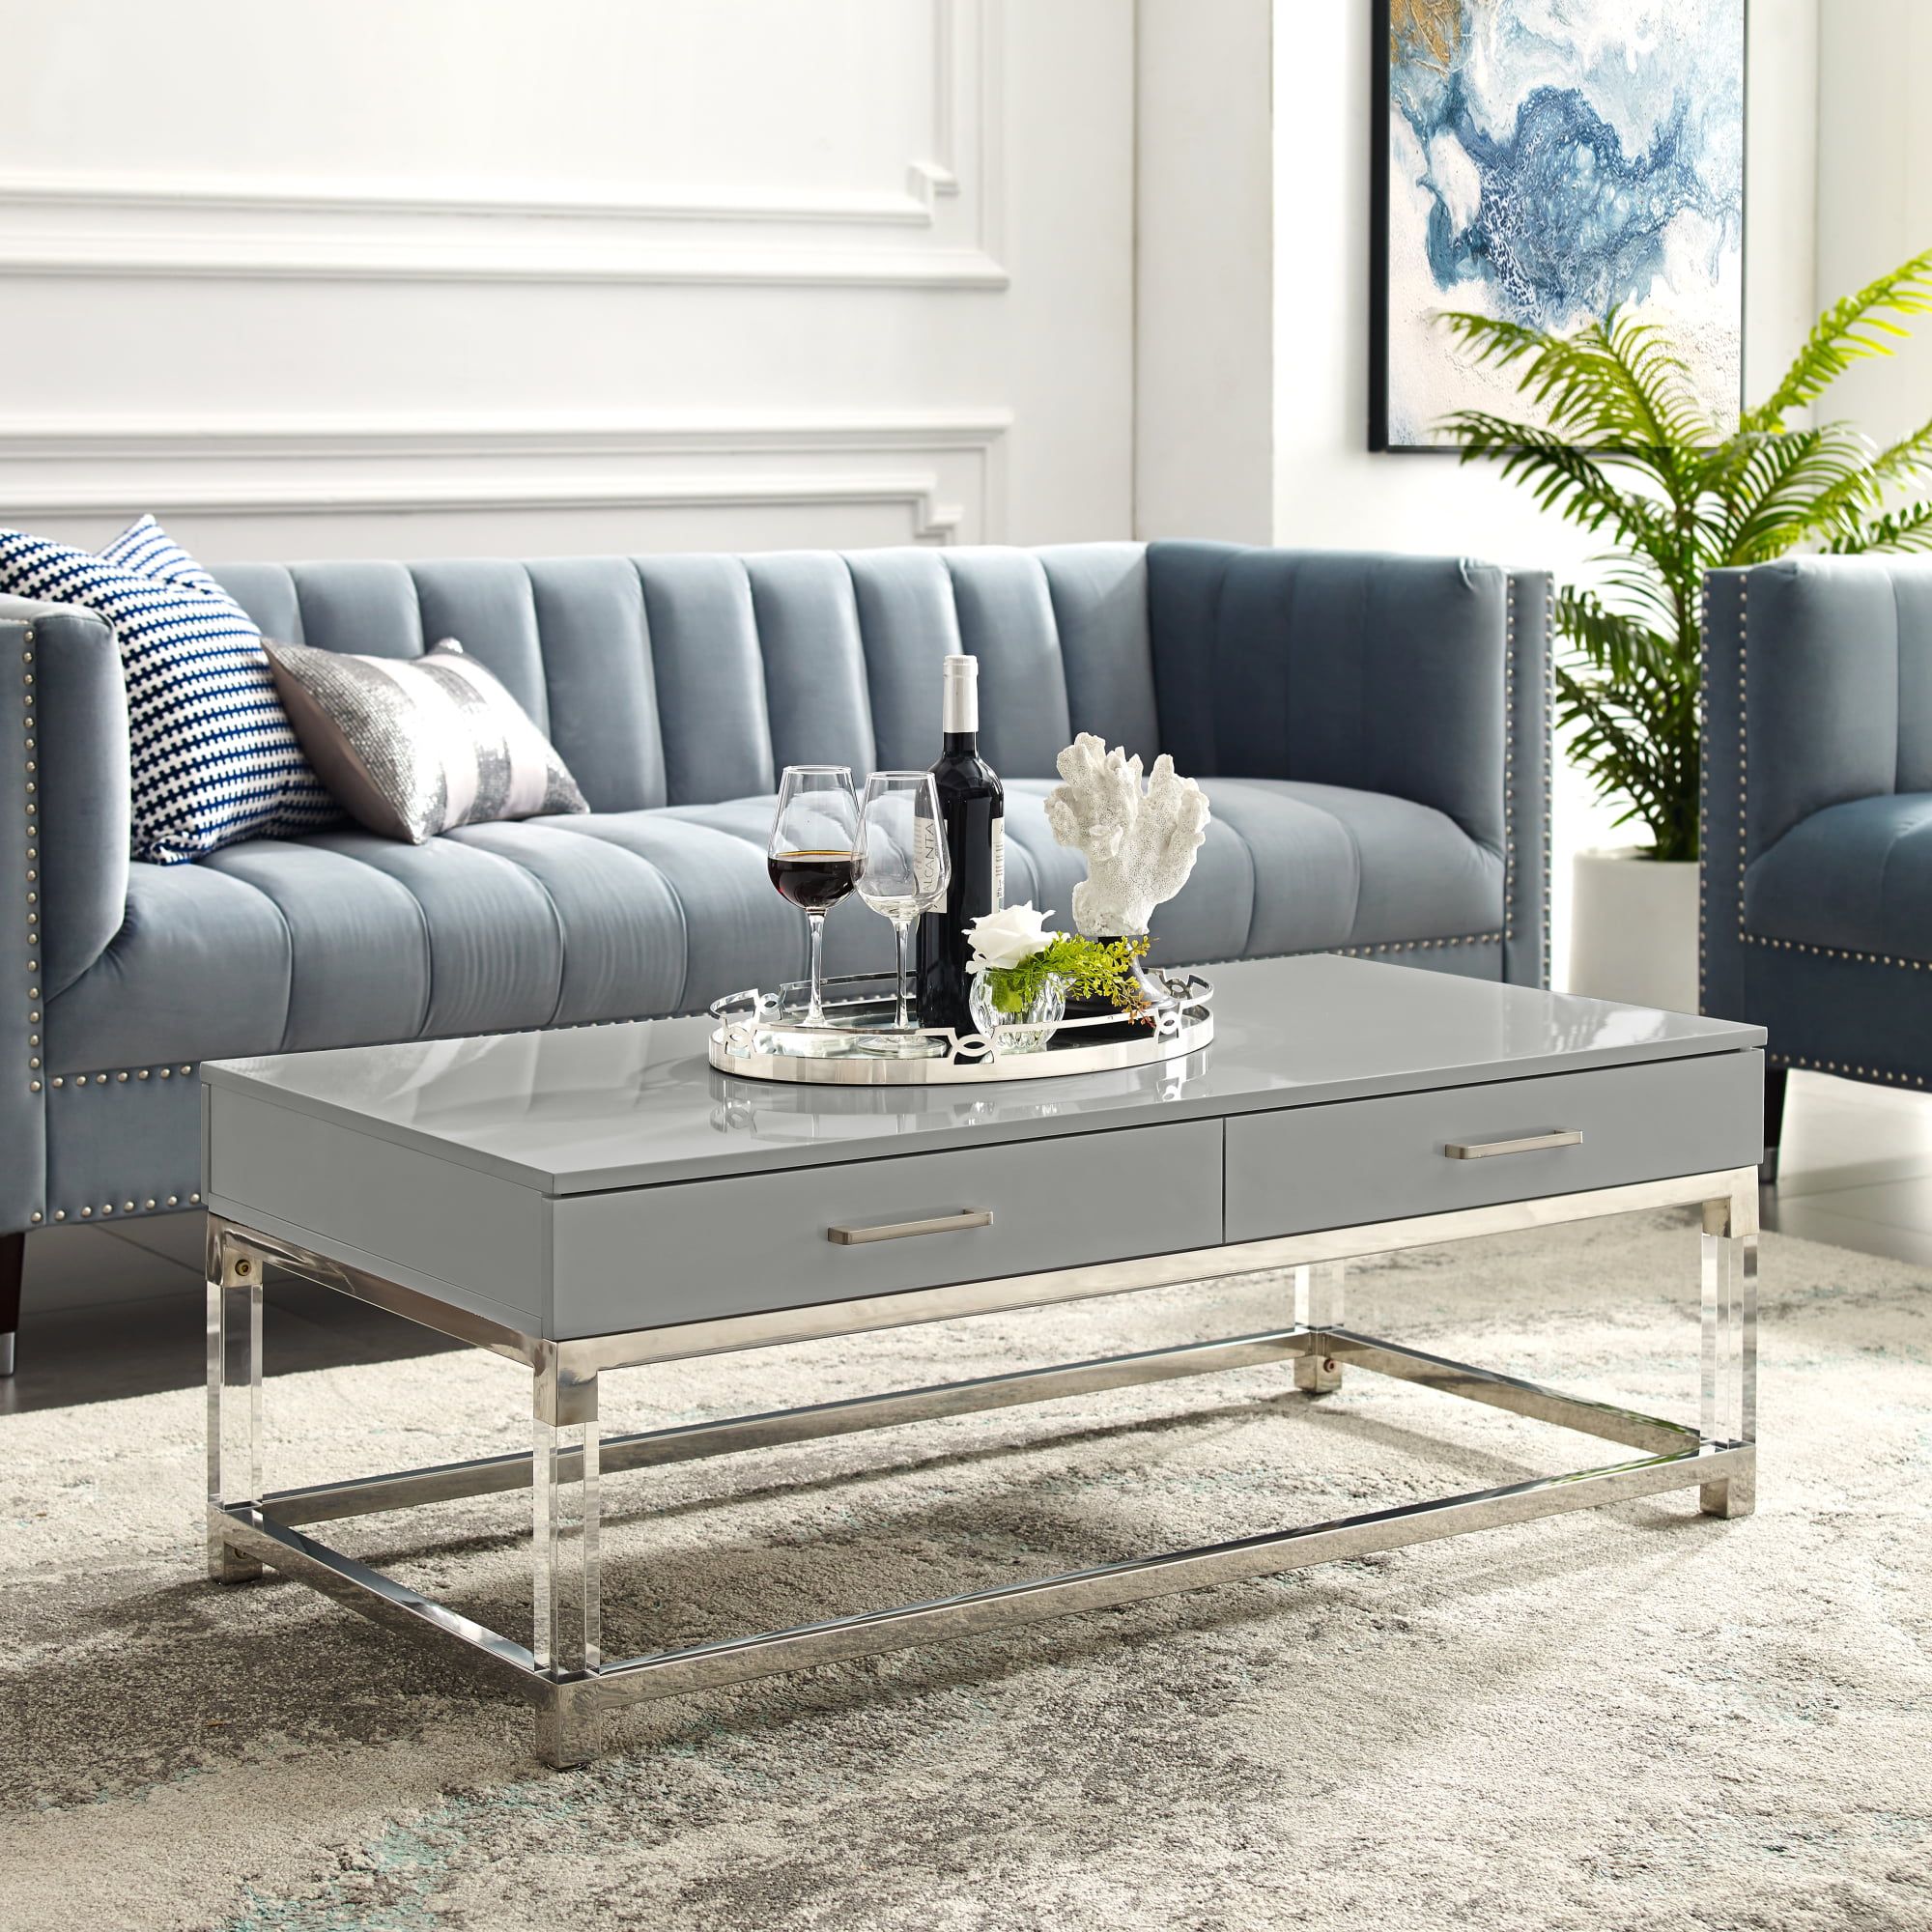 Ebbe Light Grey Chrome Coffee Table – High Gloss Finish, Acrylic Leg,  Stainless Steel Base, 2 Drawers – Walmart Throughout Glossy Finished Metal Coffee Tables (View 4 of 15)